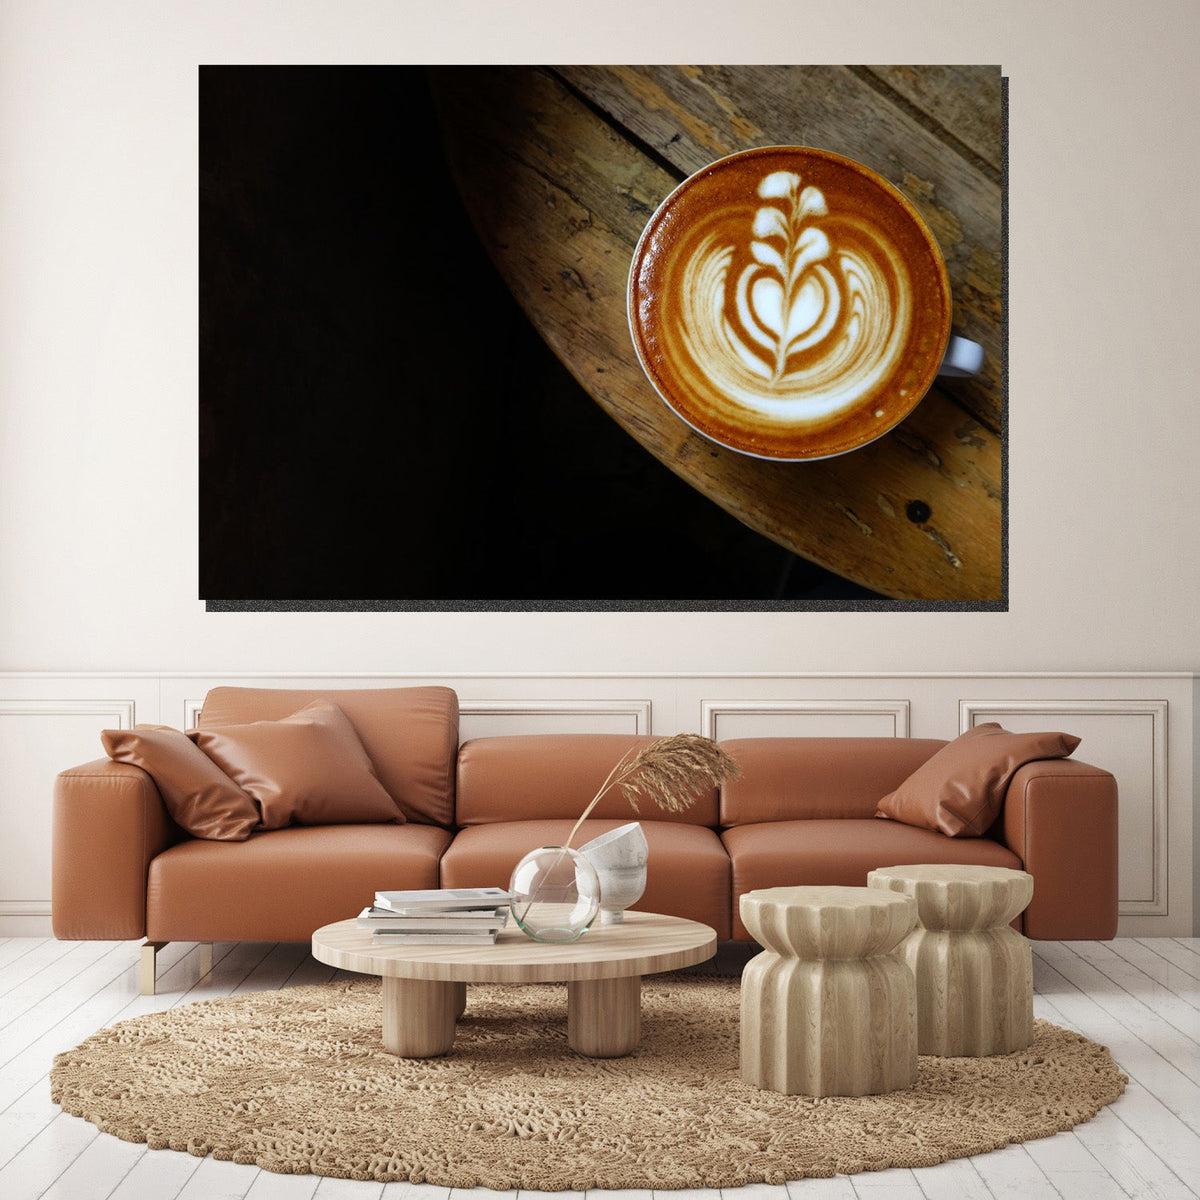 https://cdn.shopify.com/s/files/1/0387/9986/8044/products/CoffeeBreakCanvasArtprintStretched-1.jpg